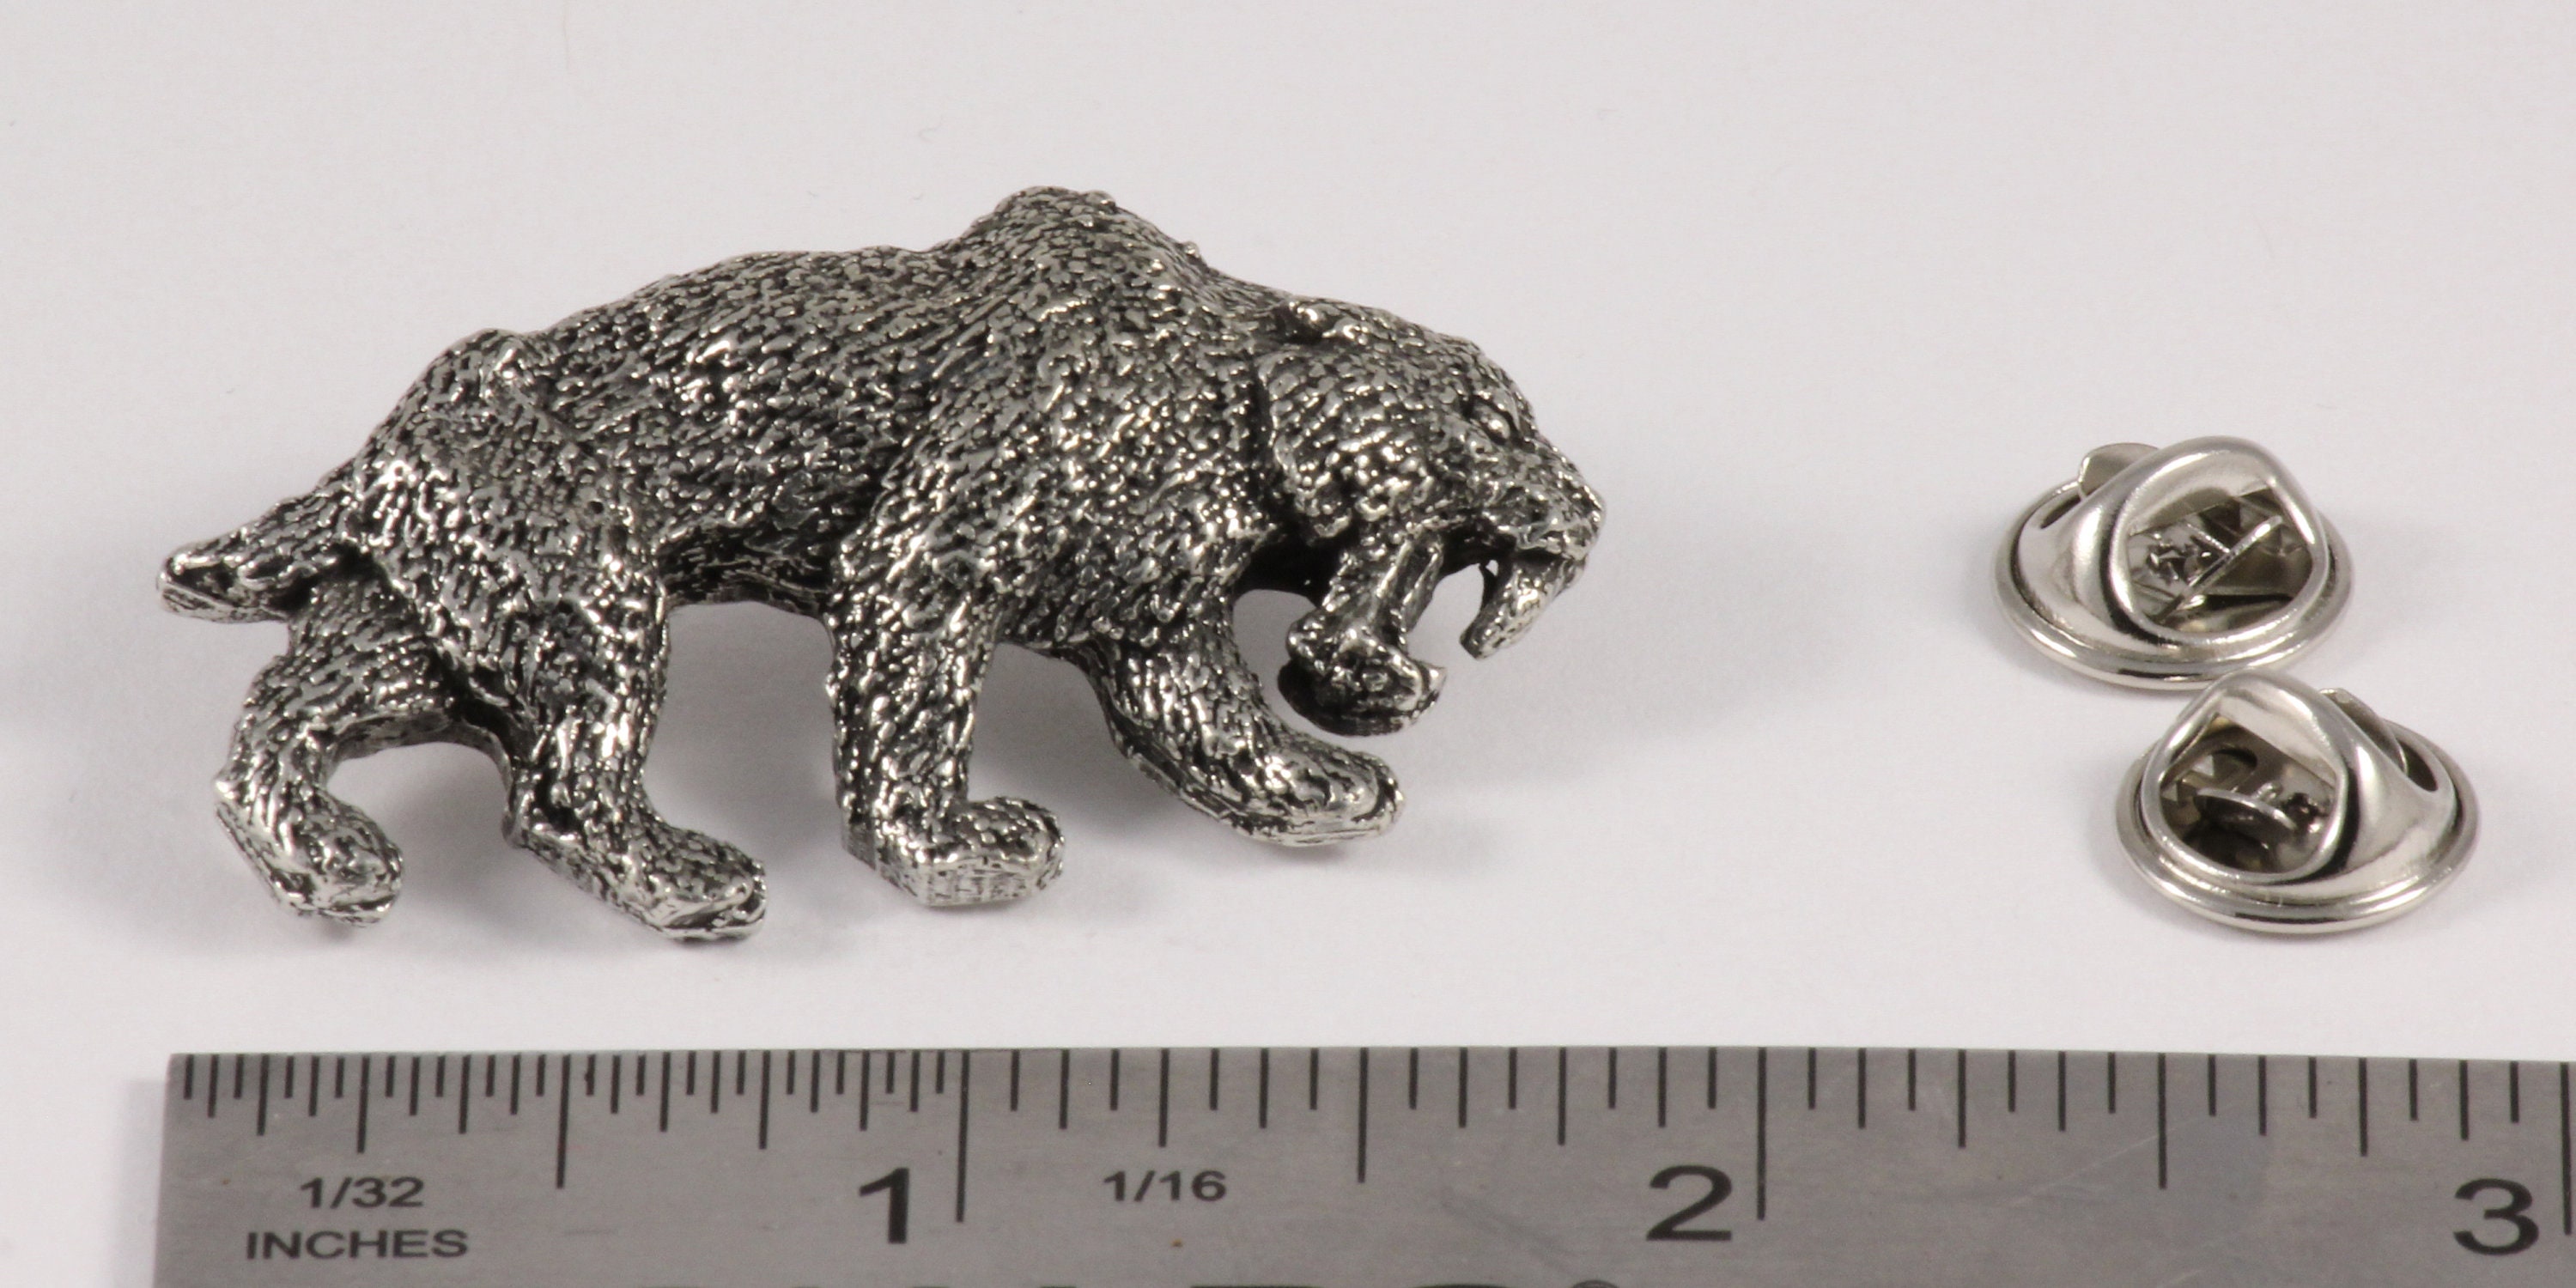 Creative Pewter Designs Saber Tooth Tiger Cat Full Body | Etsy